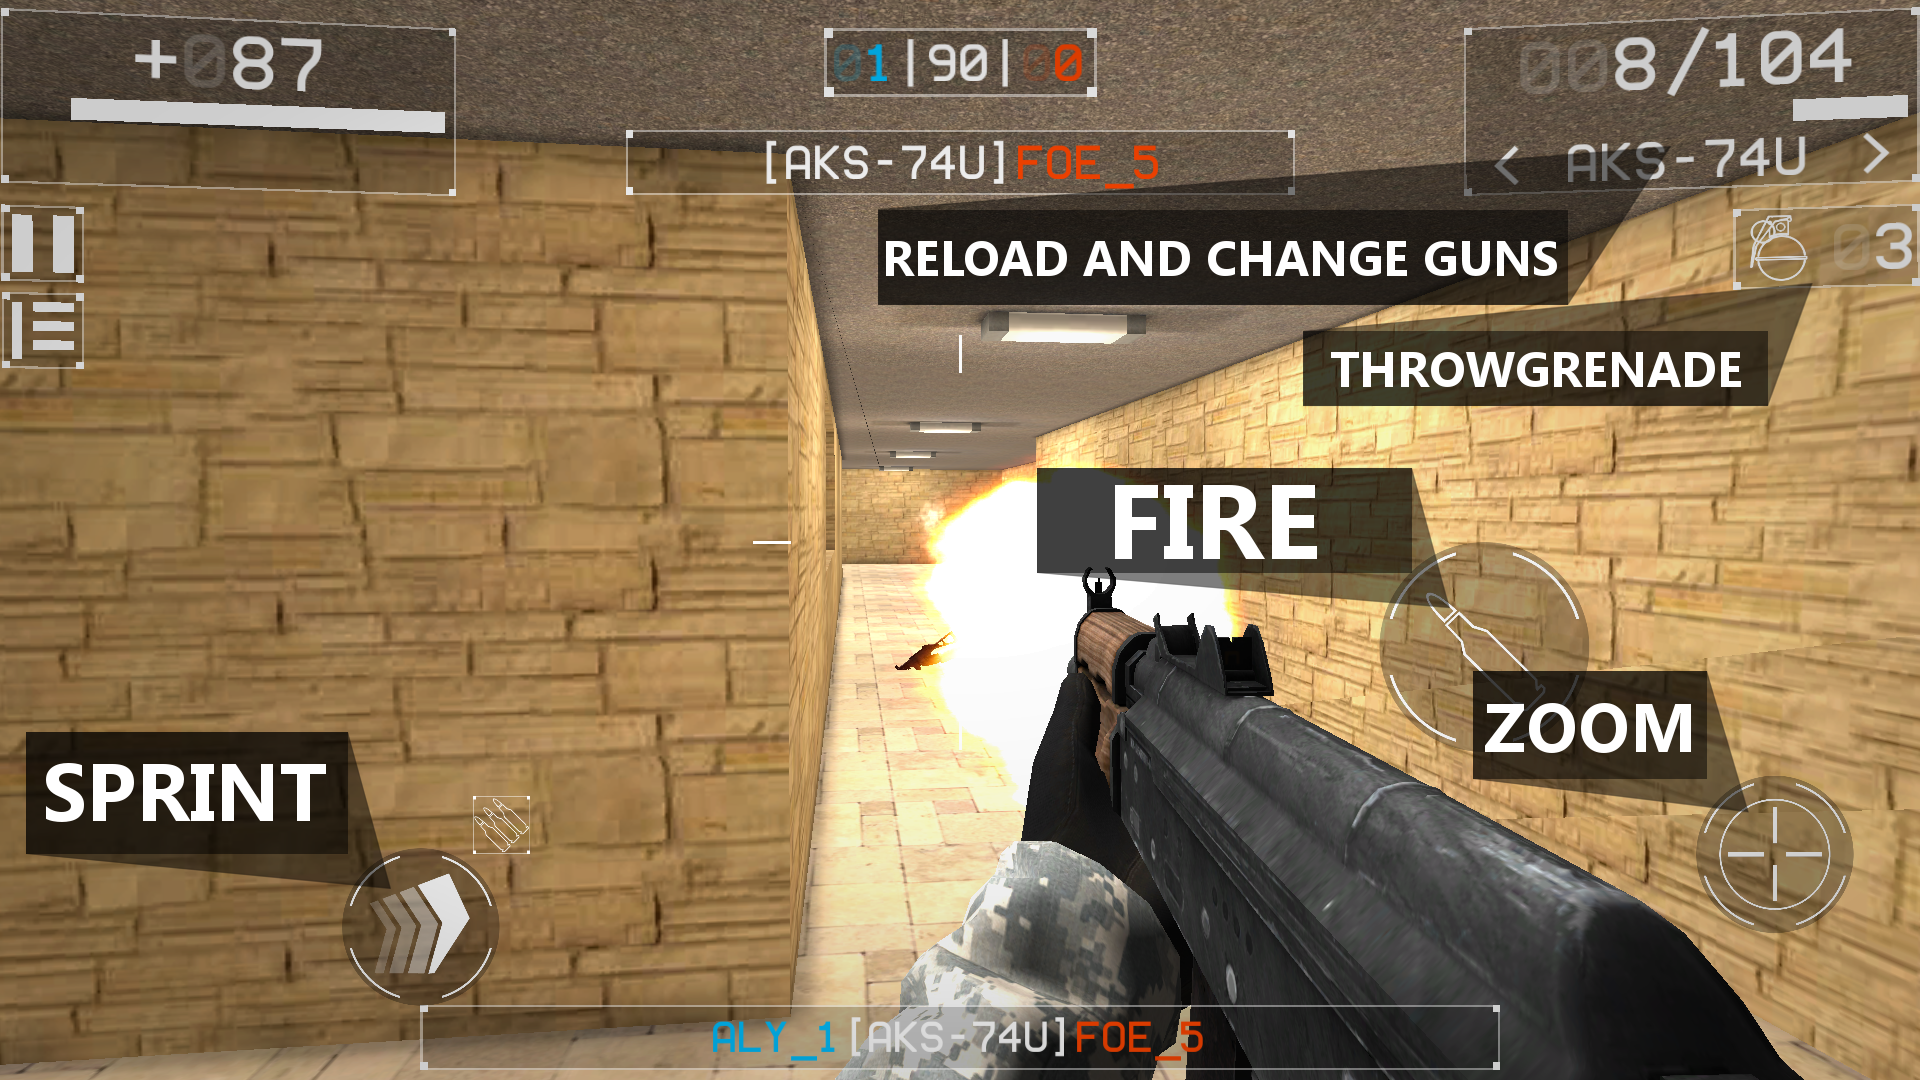 Squad Strike 3 for Android - APK Download - 